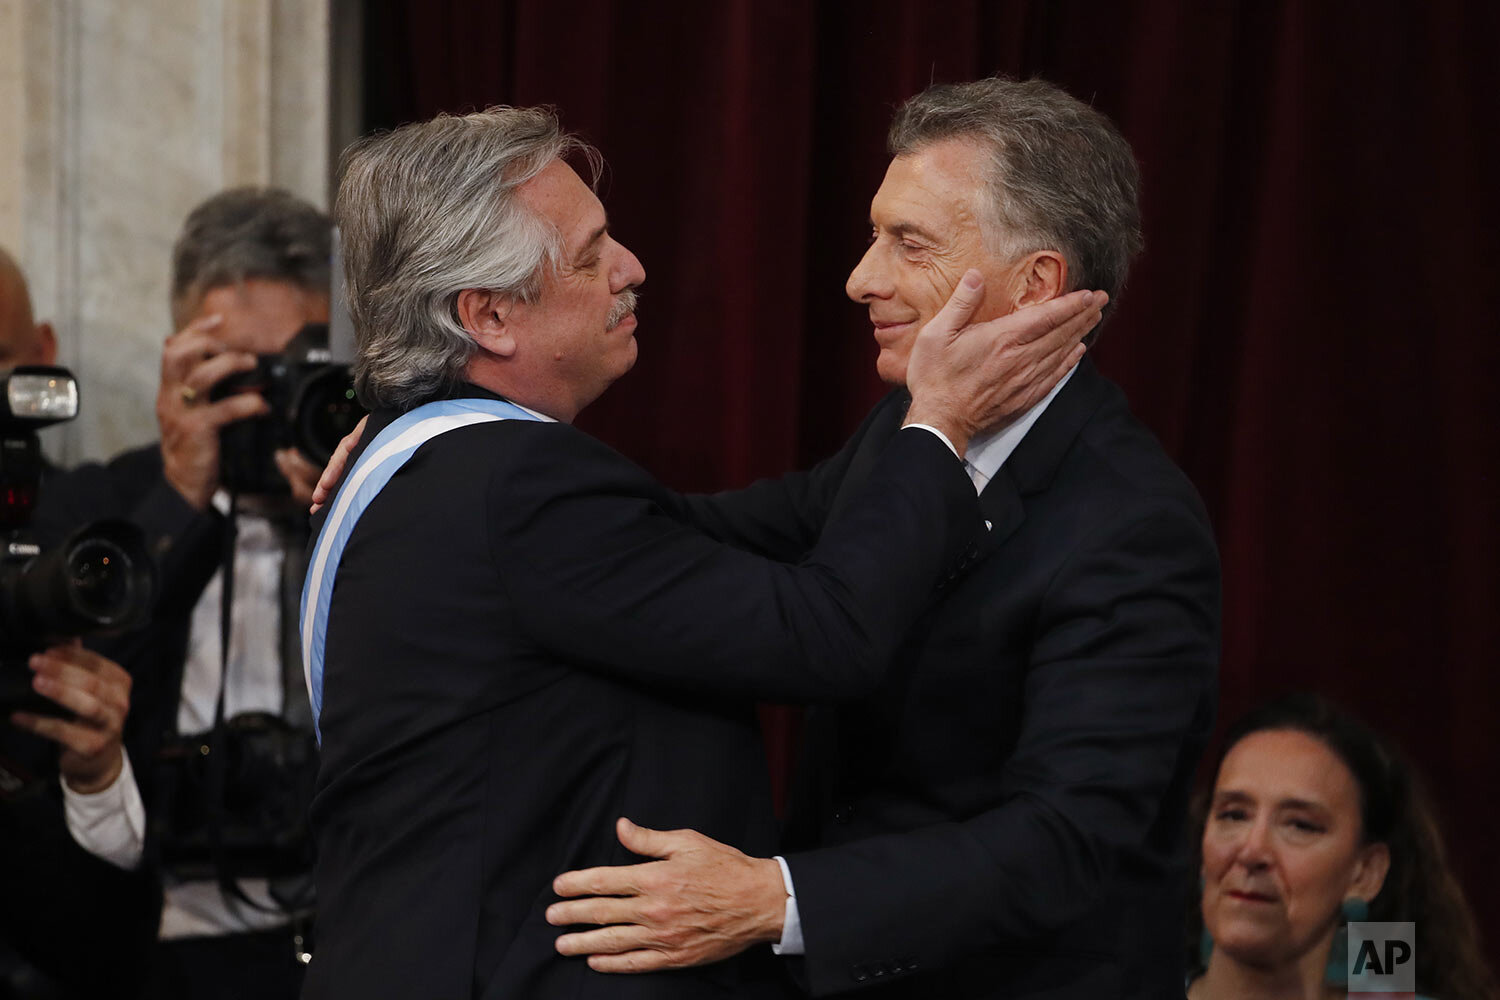  Argentina's new President Alberto Fernandez, left, embraces outgoing president Mauricio Macri after taking the oath of office at Congress in Buenos Aires, Argentina, Dec. 10, 2019. (AP Photo/Natacha Pisarenko) 